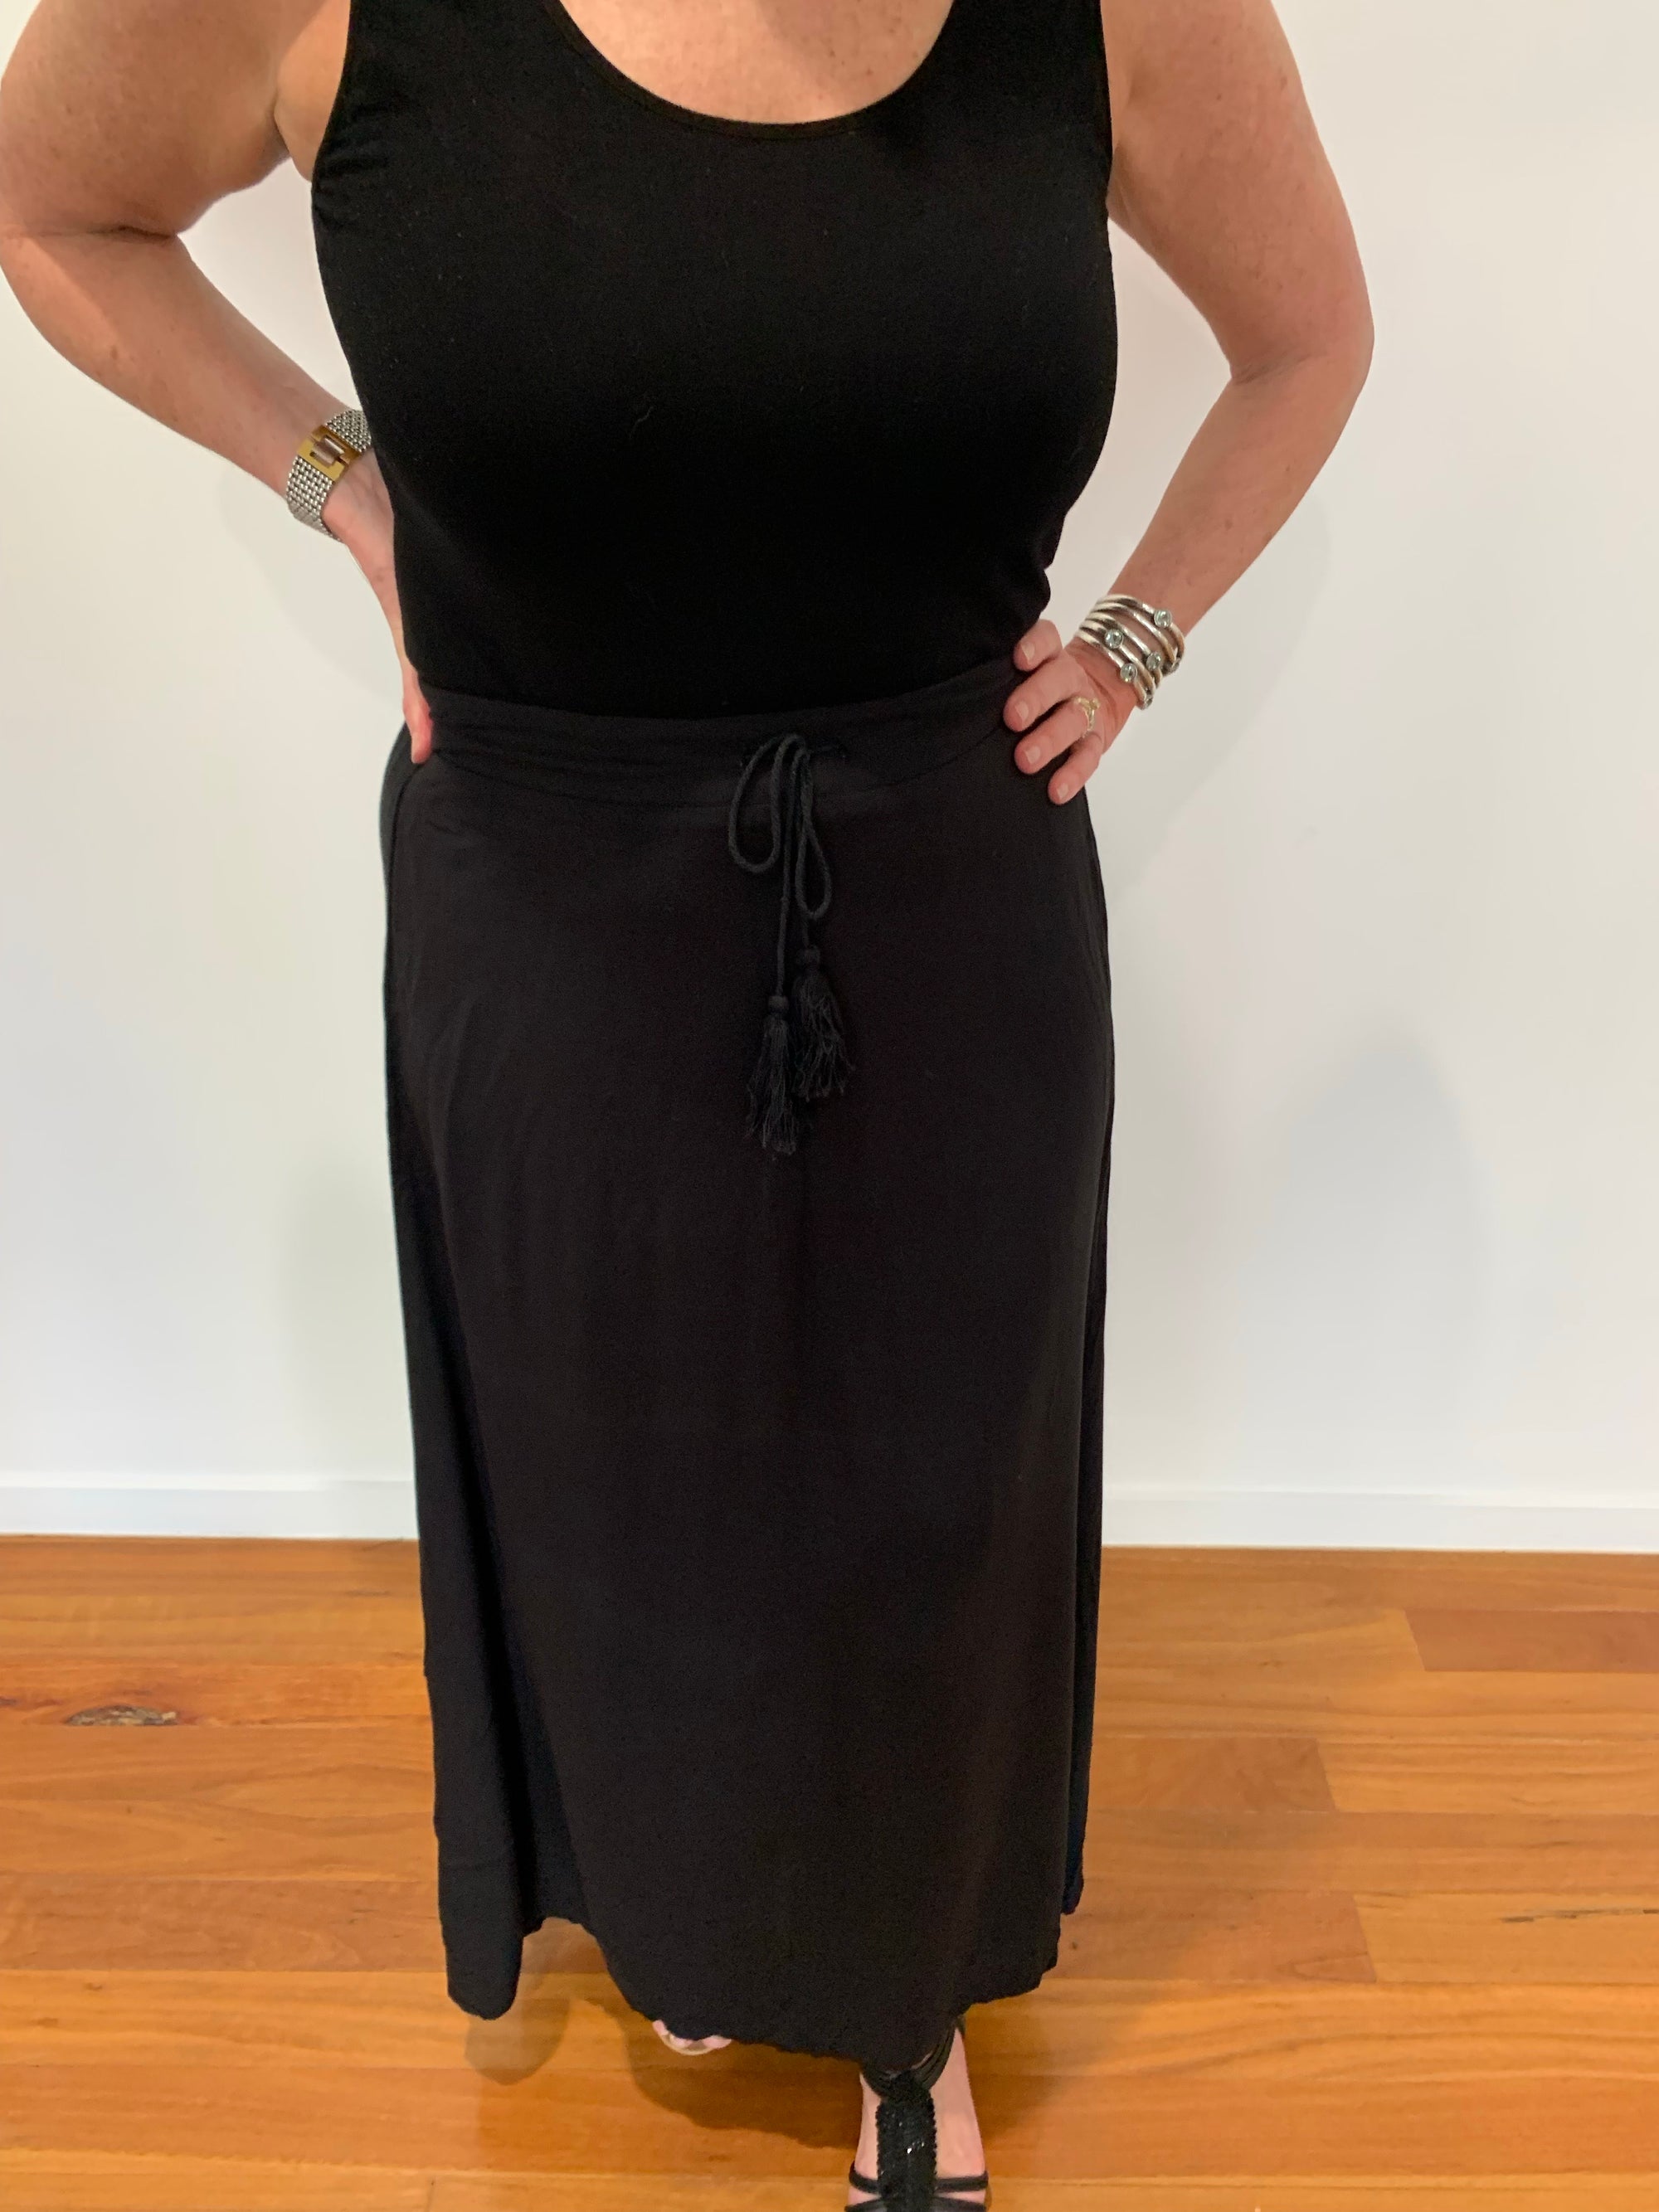 A-Line Skirt in Black with Drawstring Waist Ankle Length & Flattering Fall